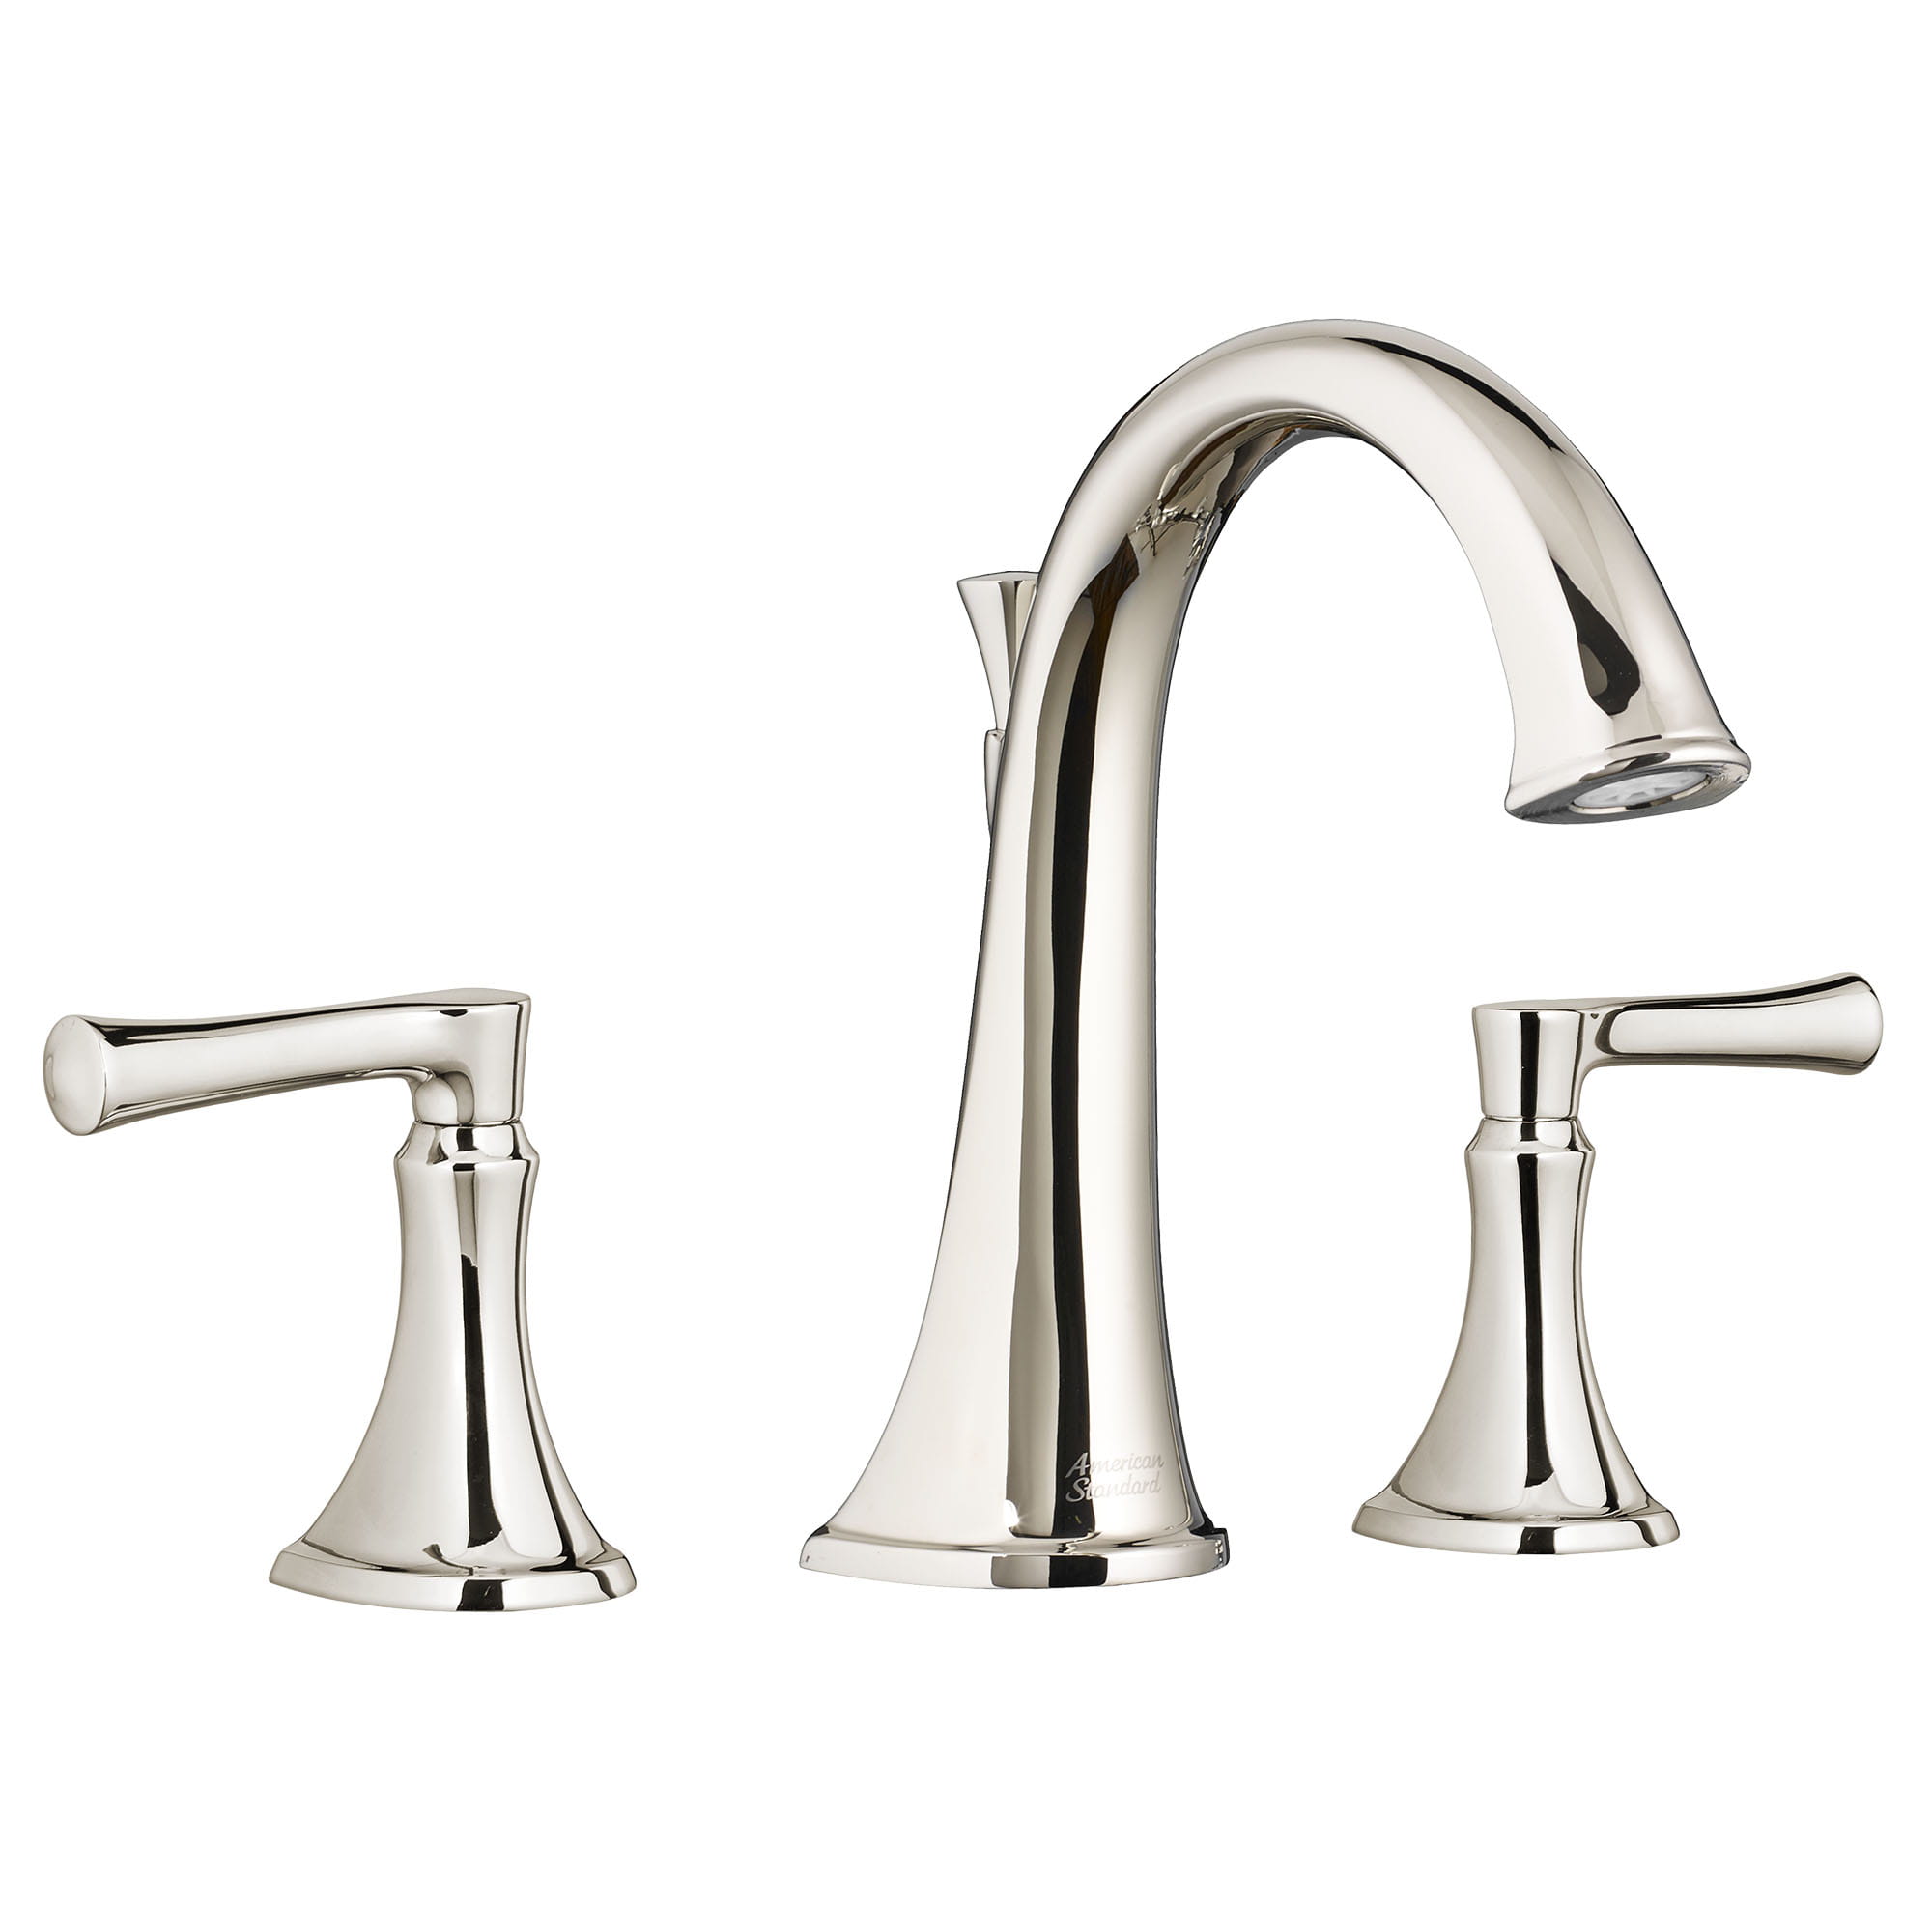 Estate Bathtub Faucet for Flash Rough in Valve with Lever Handles POLISHED  NICKEL